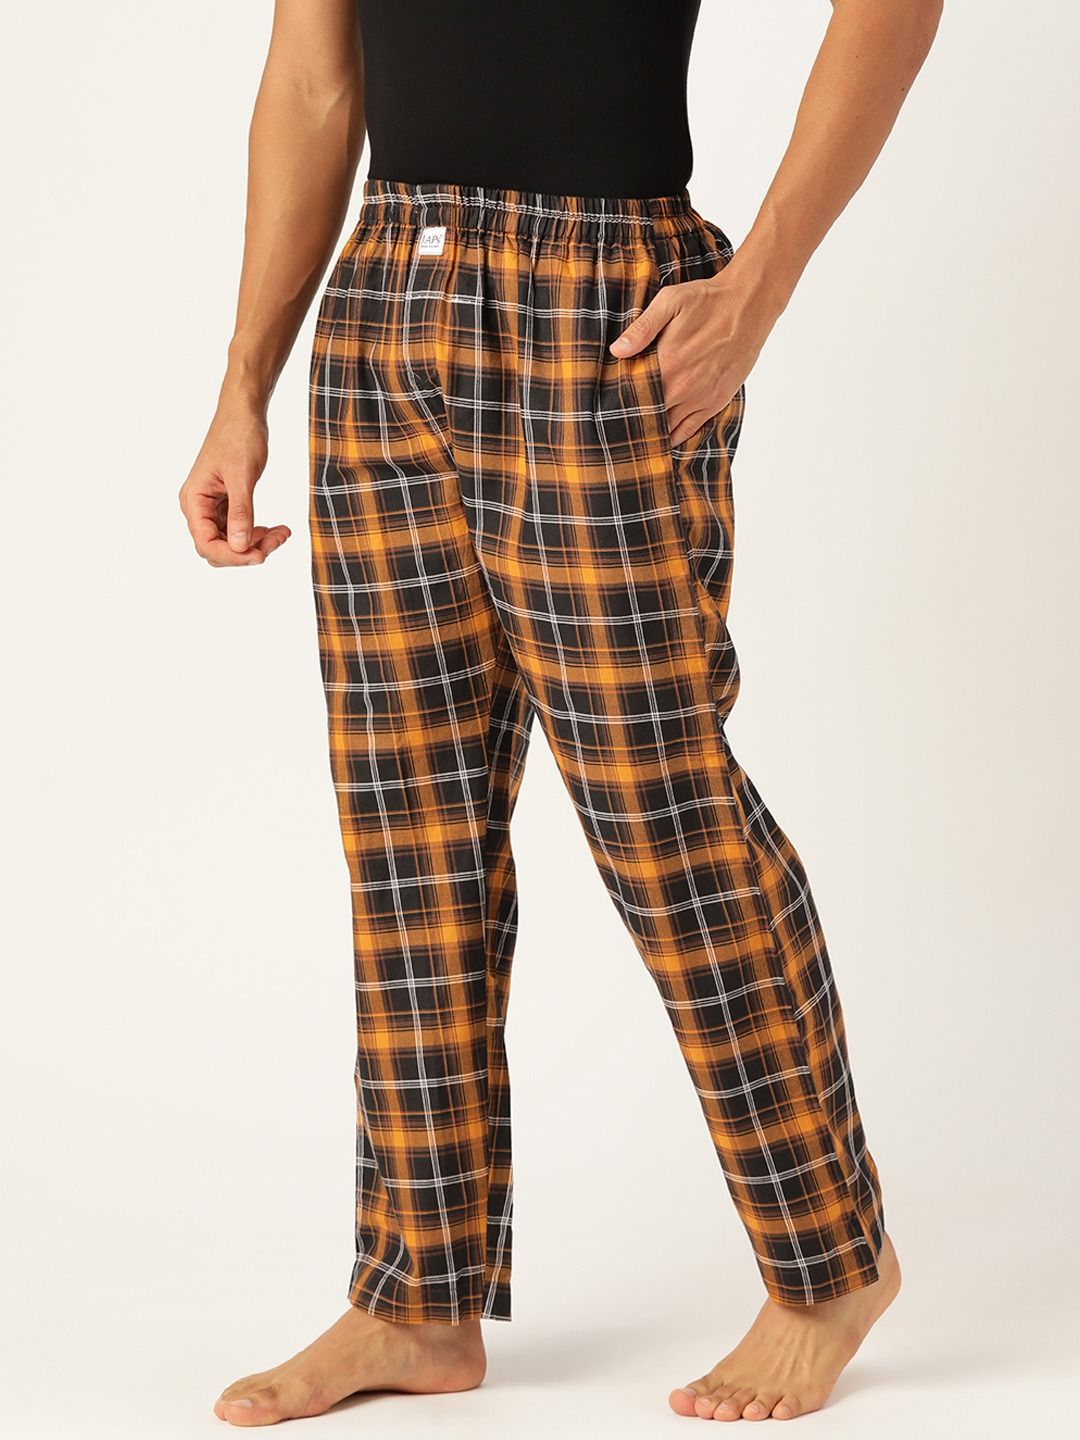 uNidraa  Beige Black Checked Printed Cotton Lounge Pants For Men